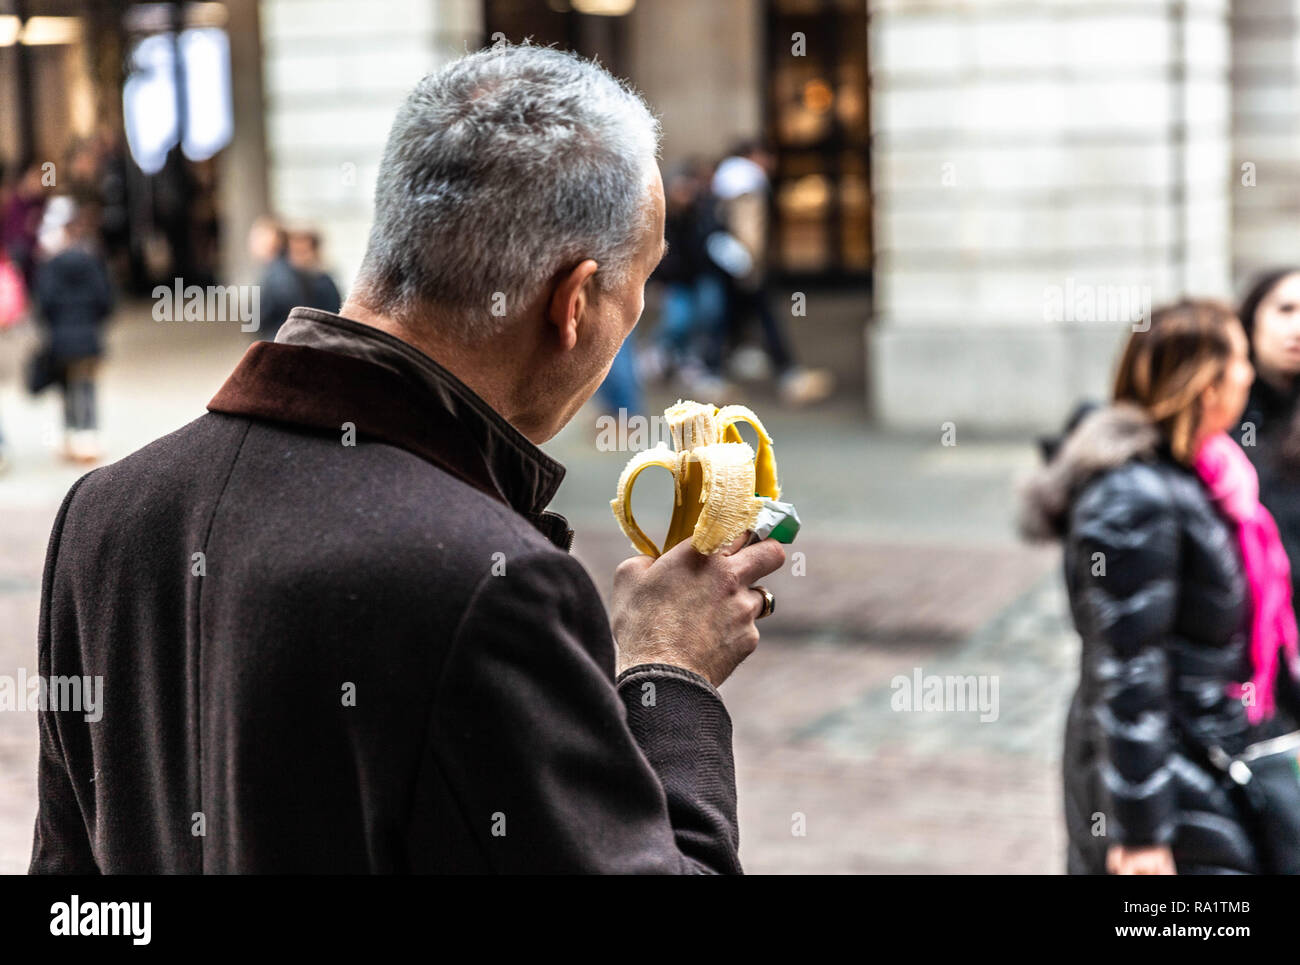 Rear view of a man eating a banana on James street, Covent Garden, London, England UK. Stock Photo